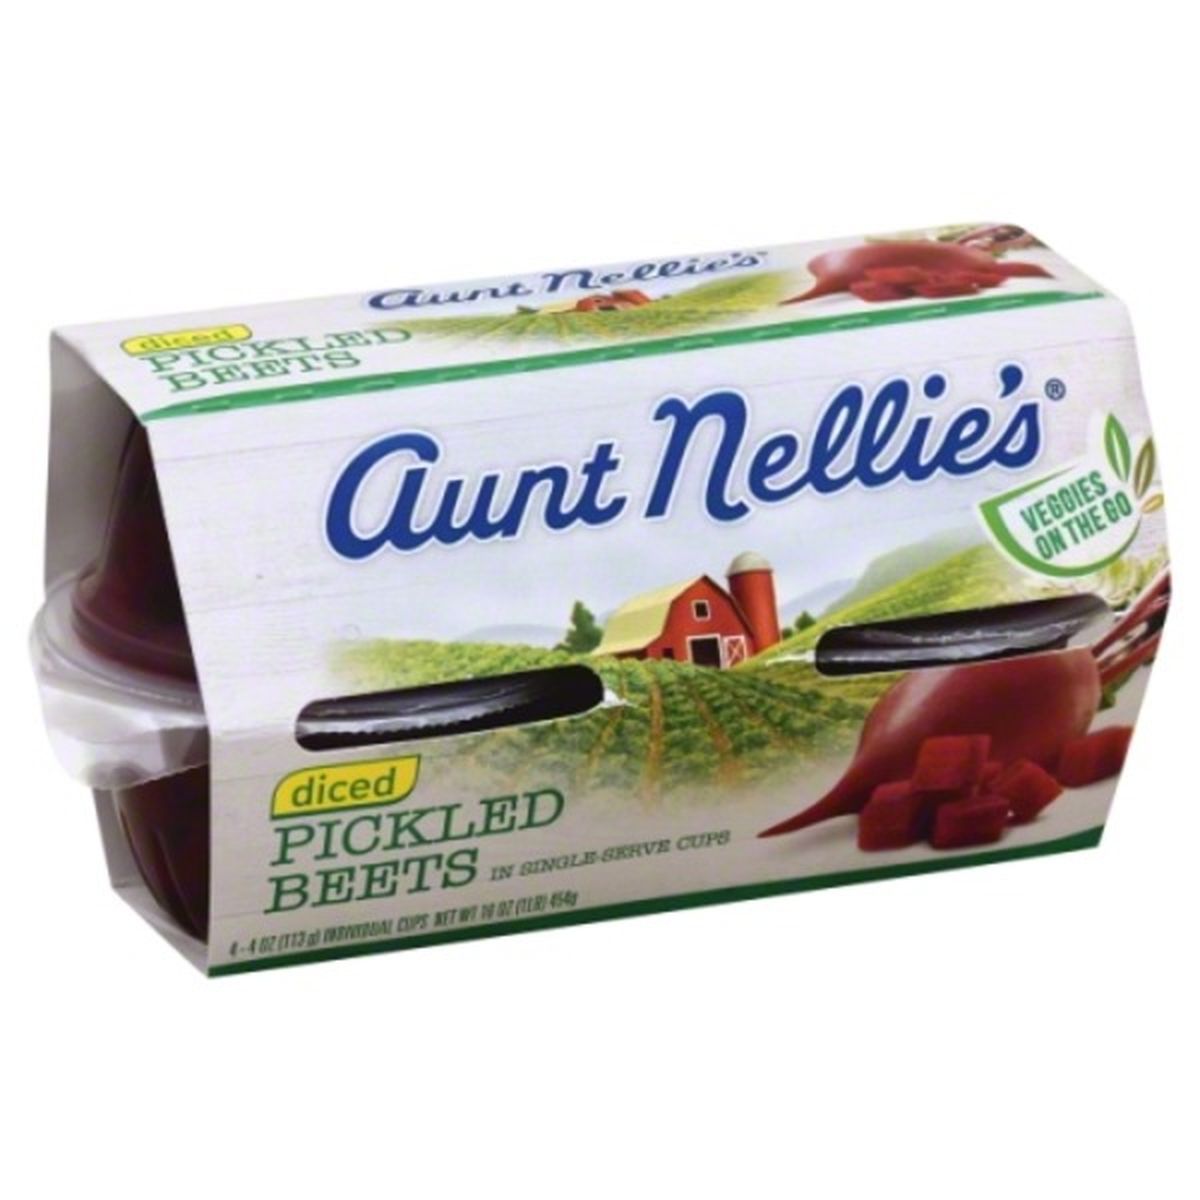 Calories in Aunt Nellie's Beets, Pickled, Diced, in Single Serve Cups